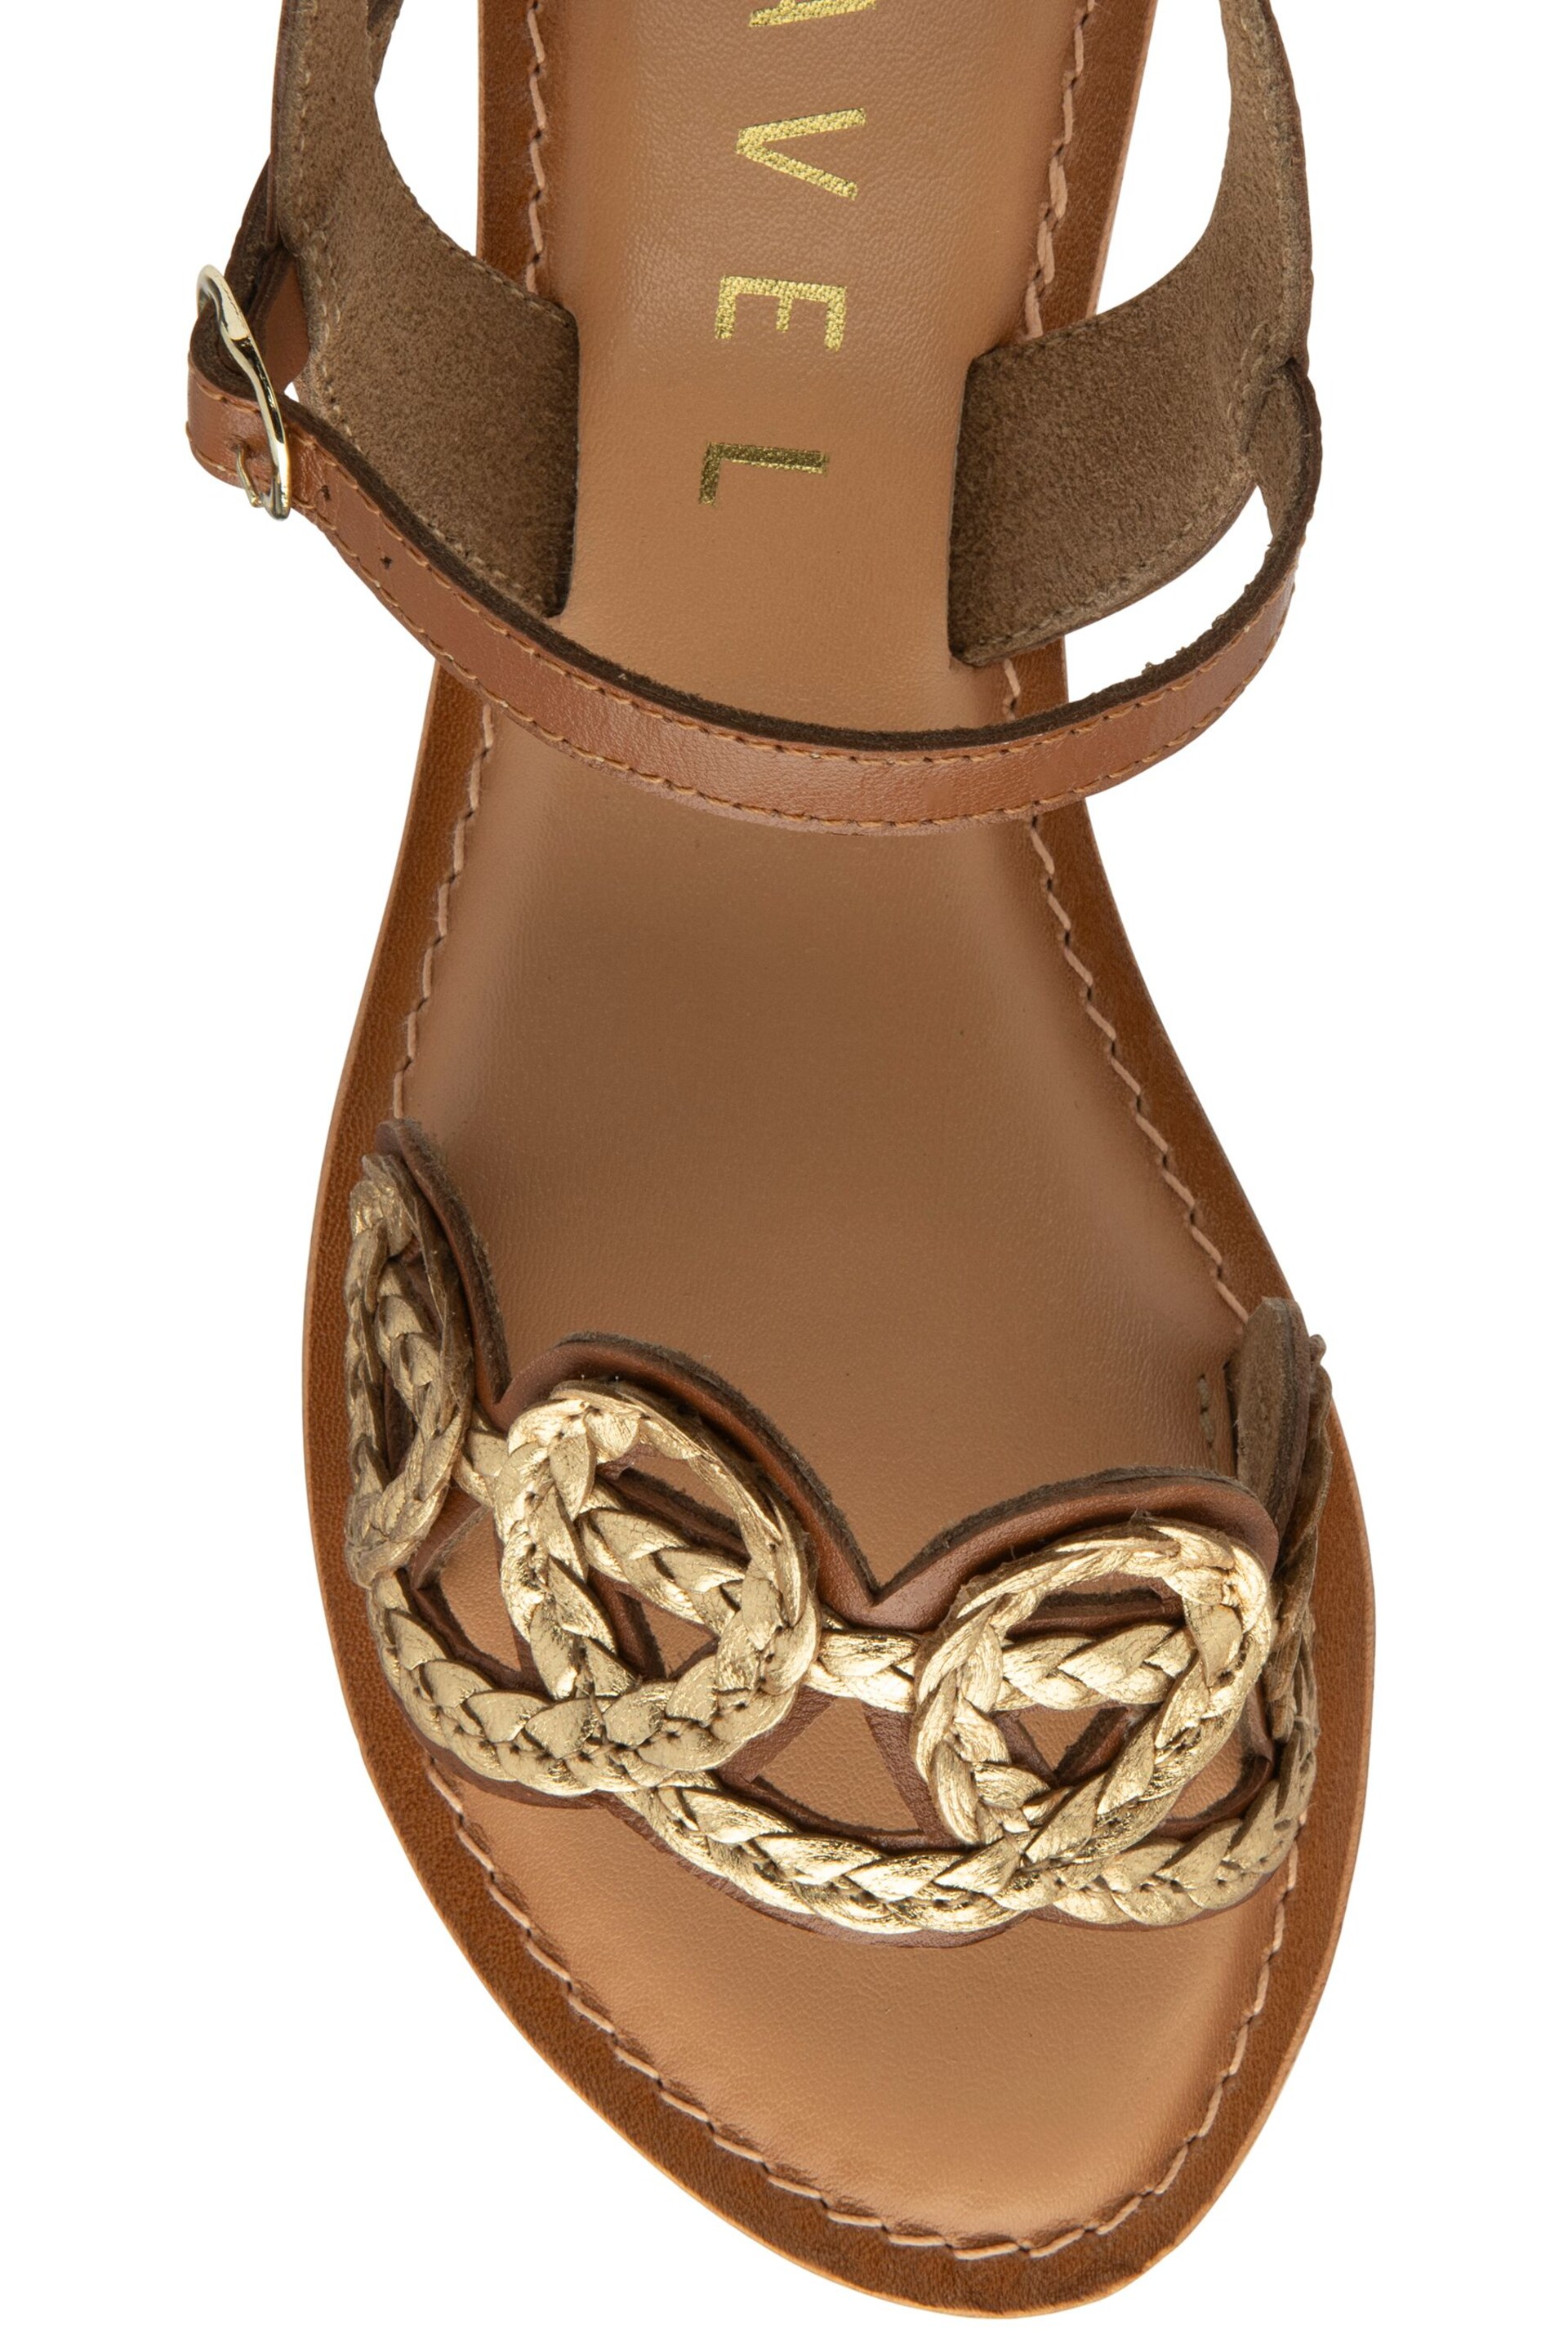 Ravel Brown Leather Sandals With Woven Trim Detail - Image 4 of 4